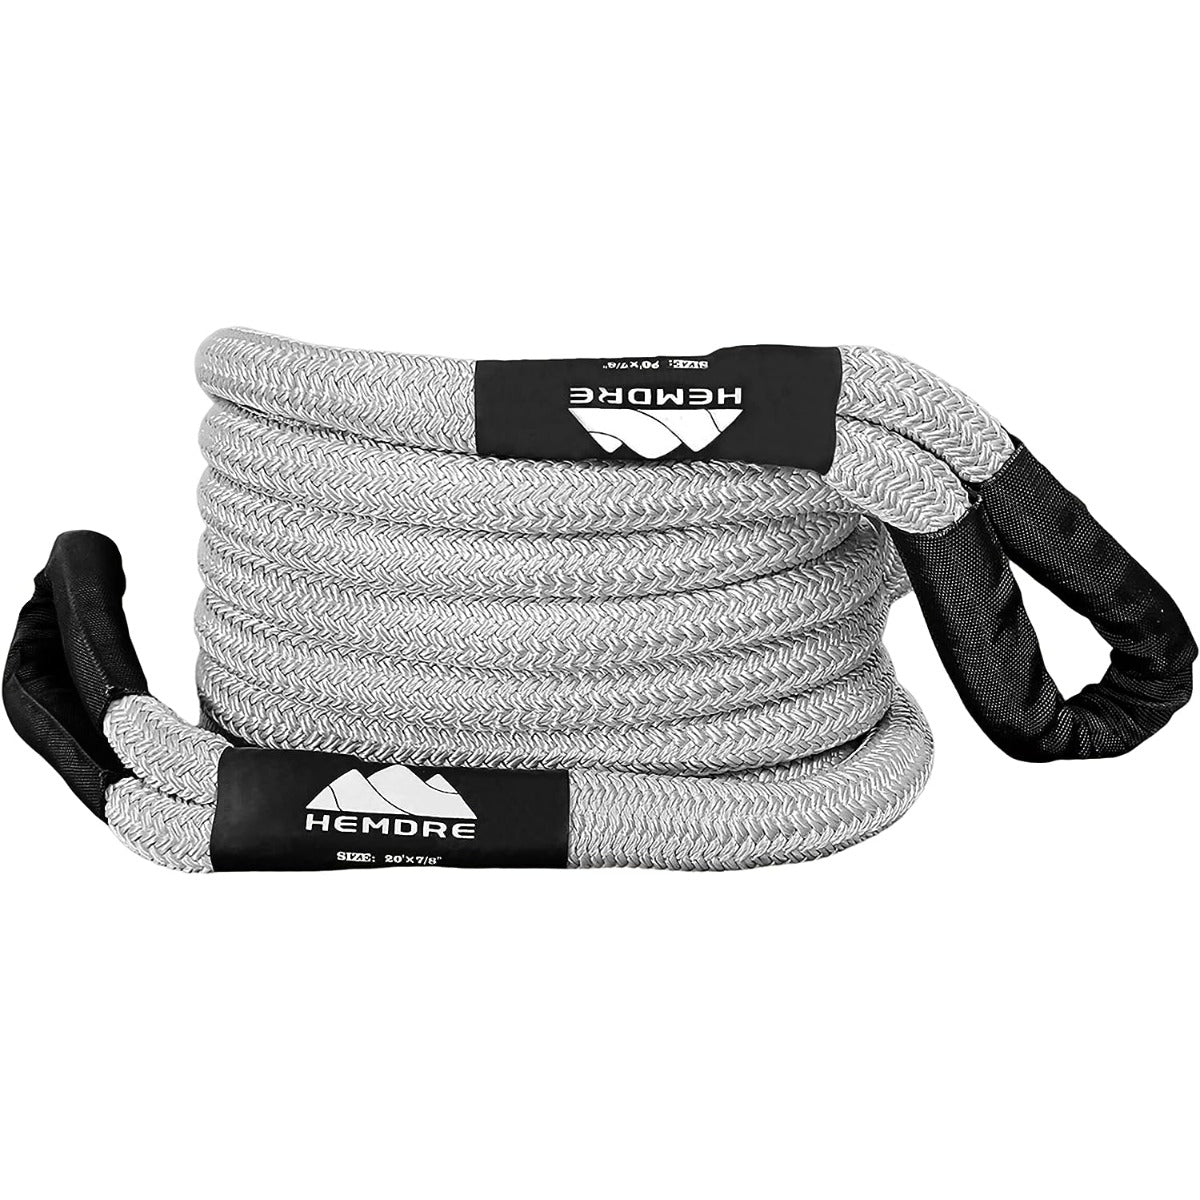 Hemdre 7/8in × 20ft Kinetic Recovery & Tow Rope (25200lbs), Heavy Duty Snatch Rope Offroad Power(Grey)